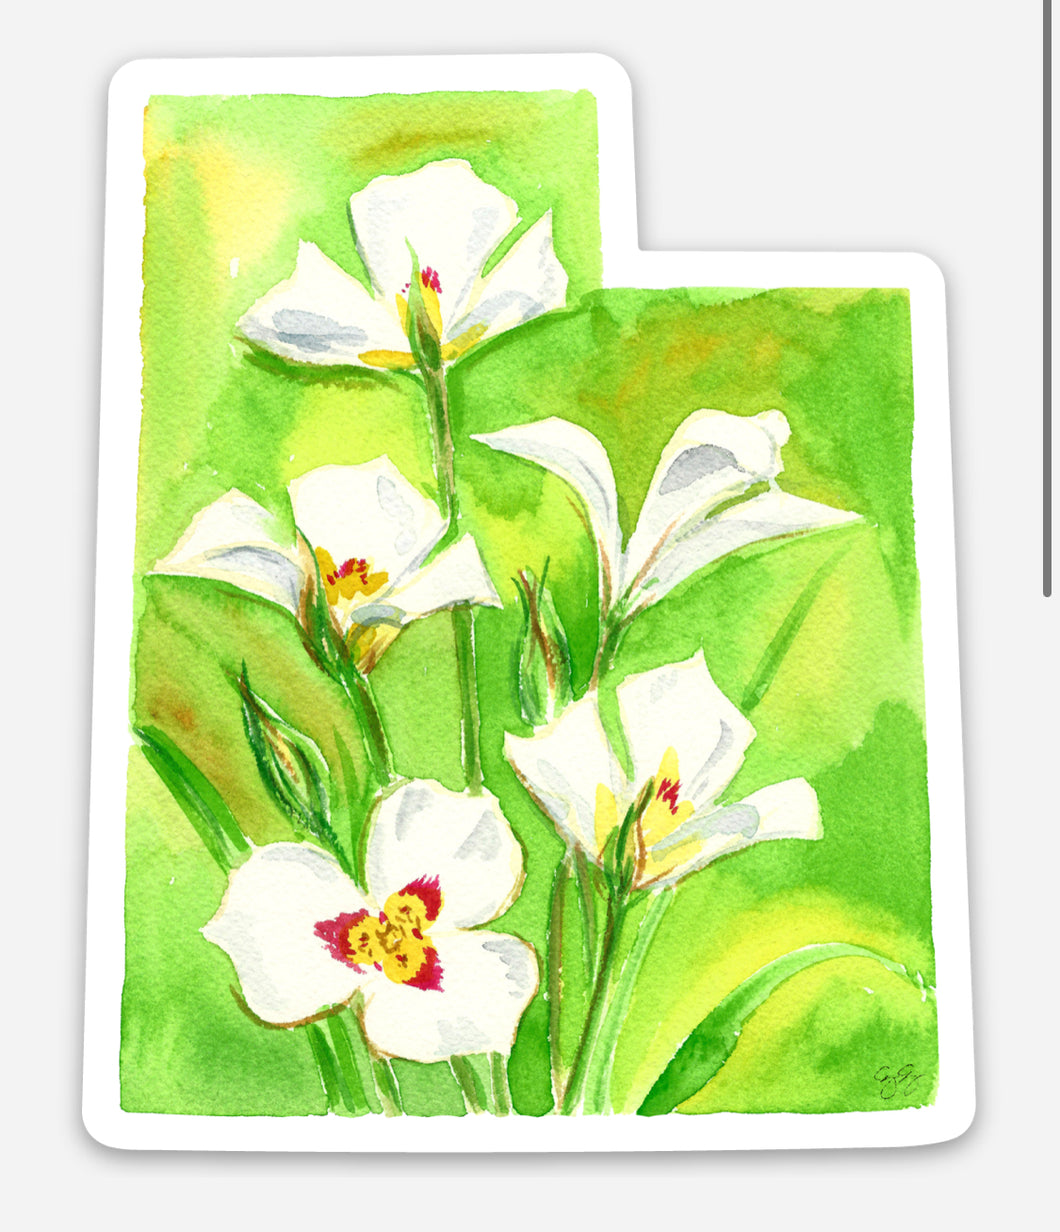 Utah Sego Lily, state flower watercolor sticker